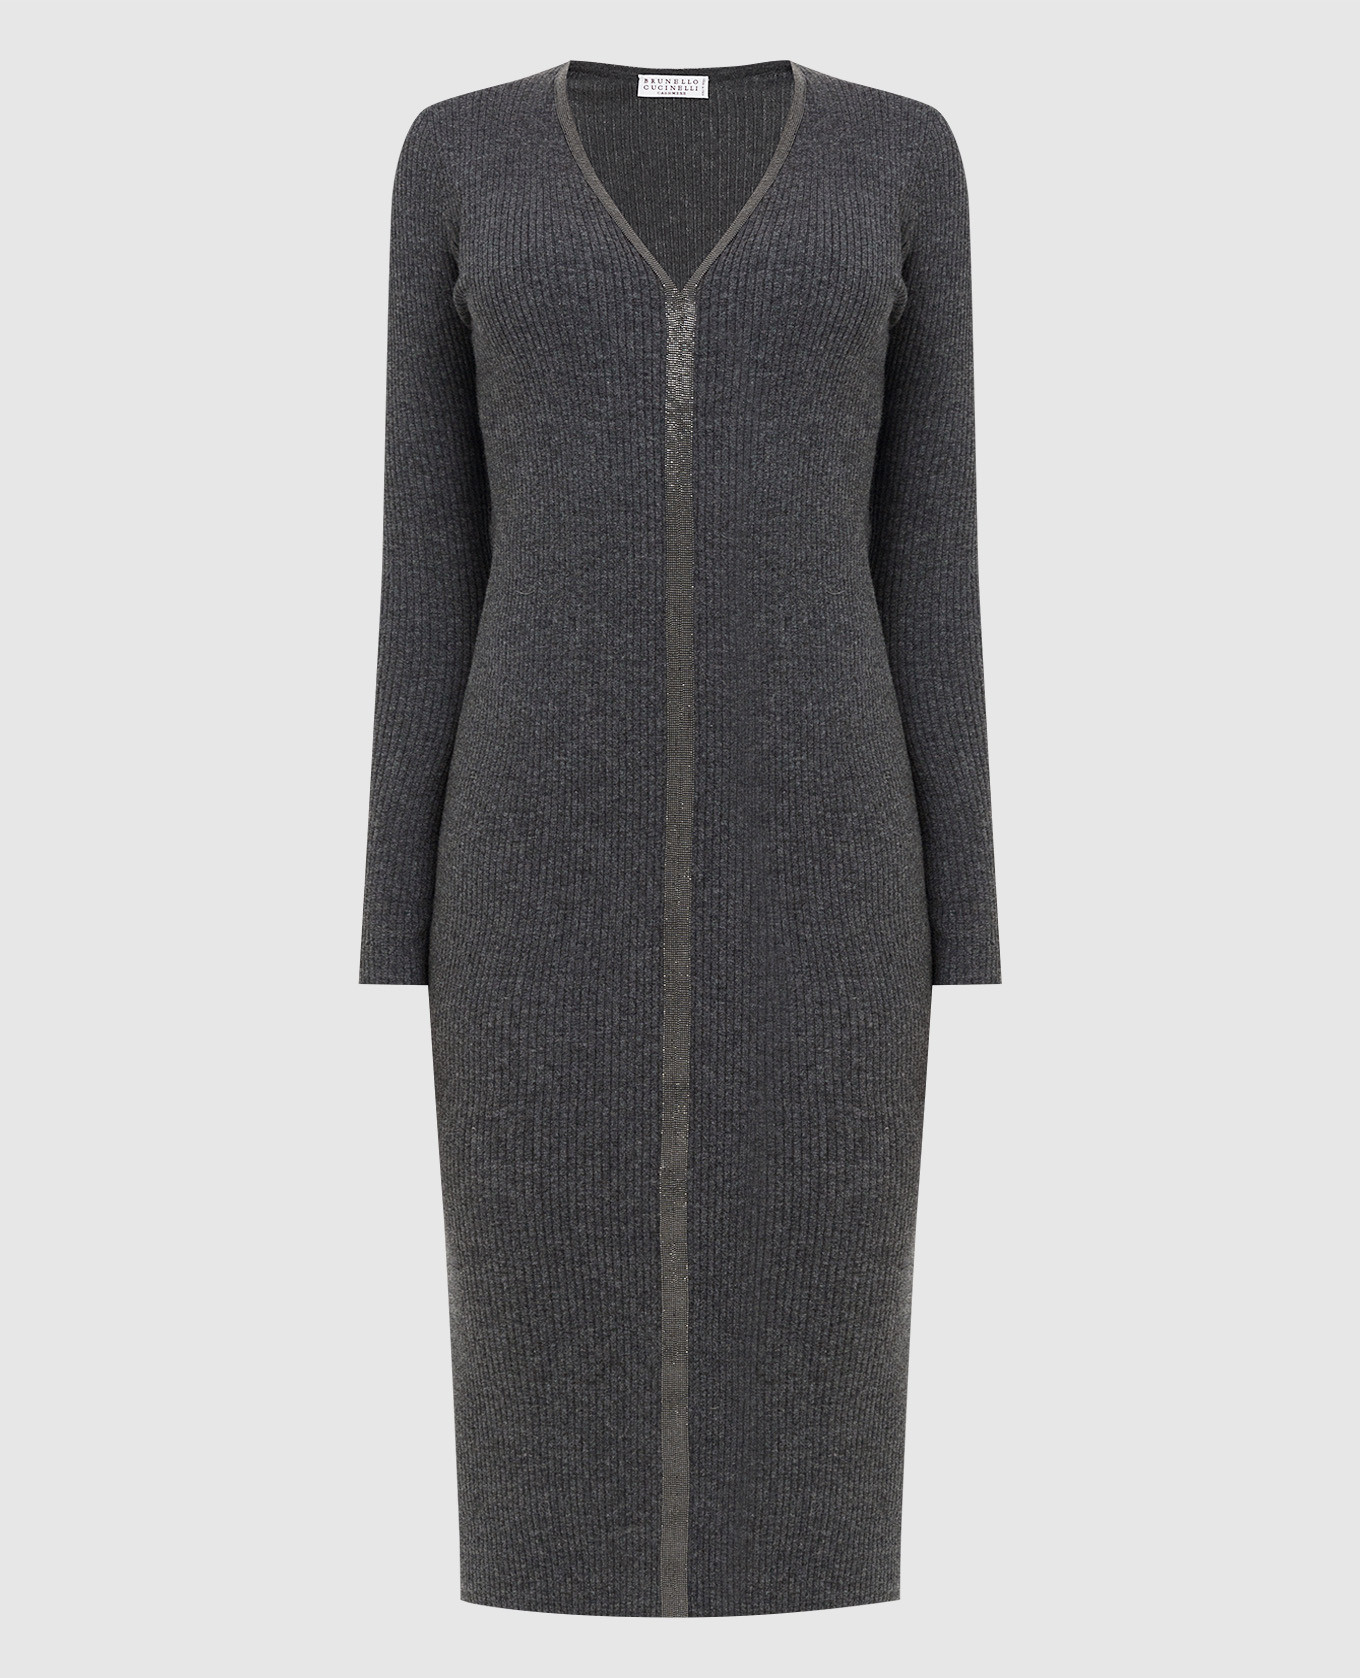 Gray cashmere dress with chains